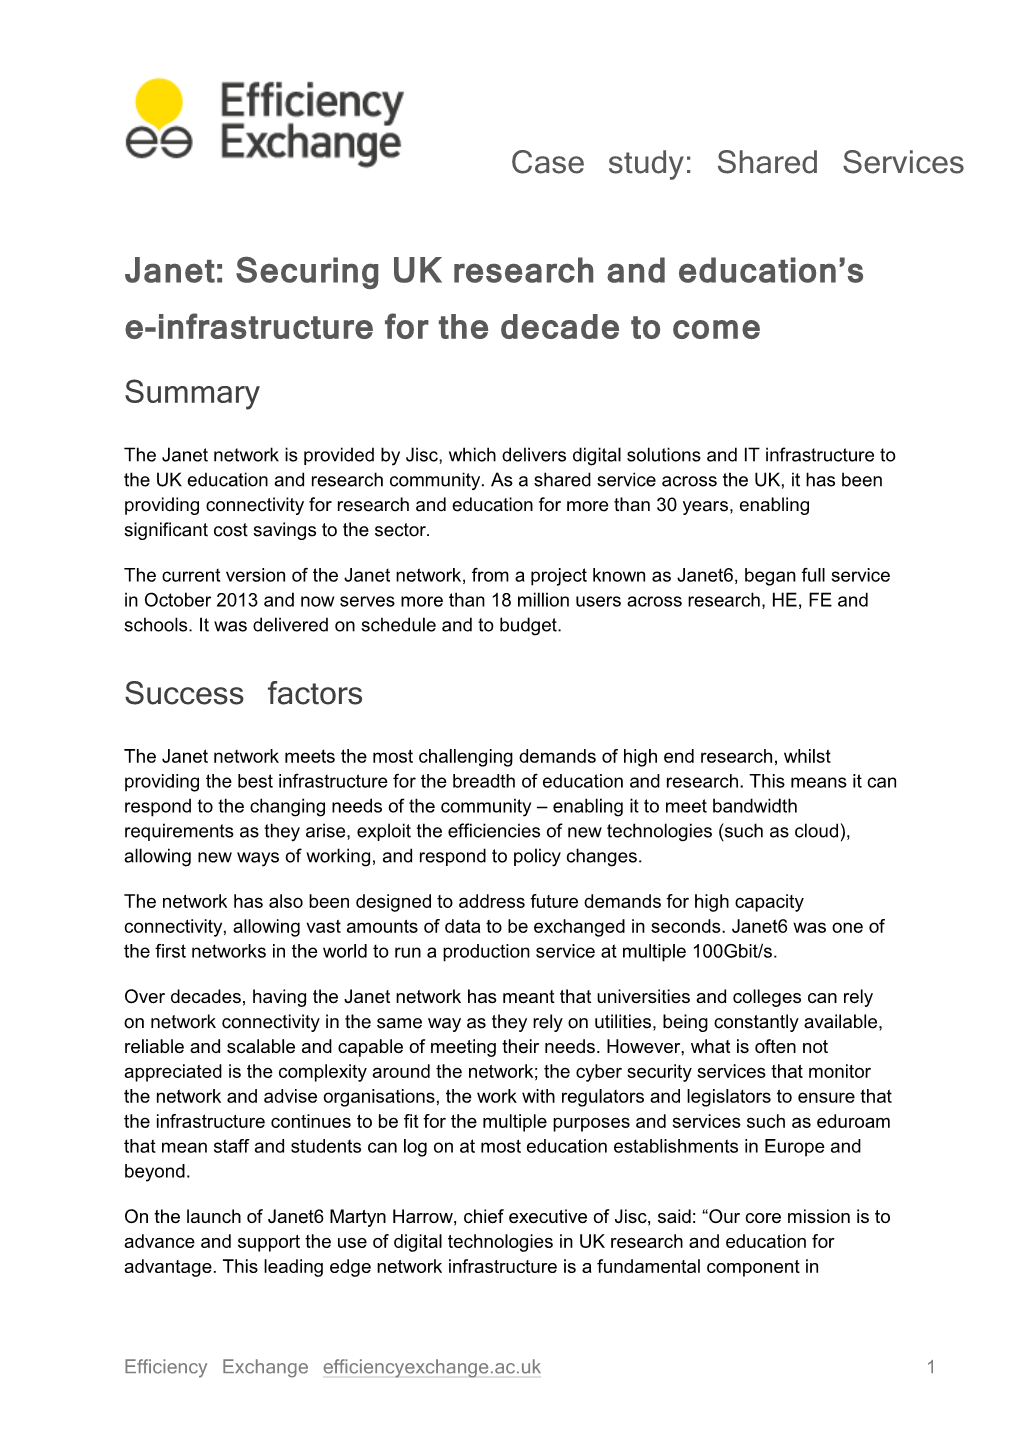 Janet: Securing UK Research and Education's E-Infrastructure for The